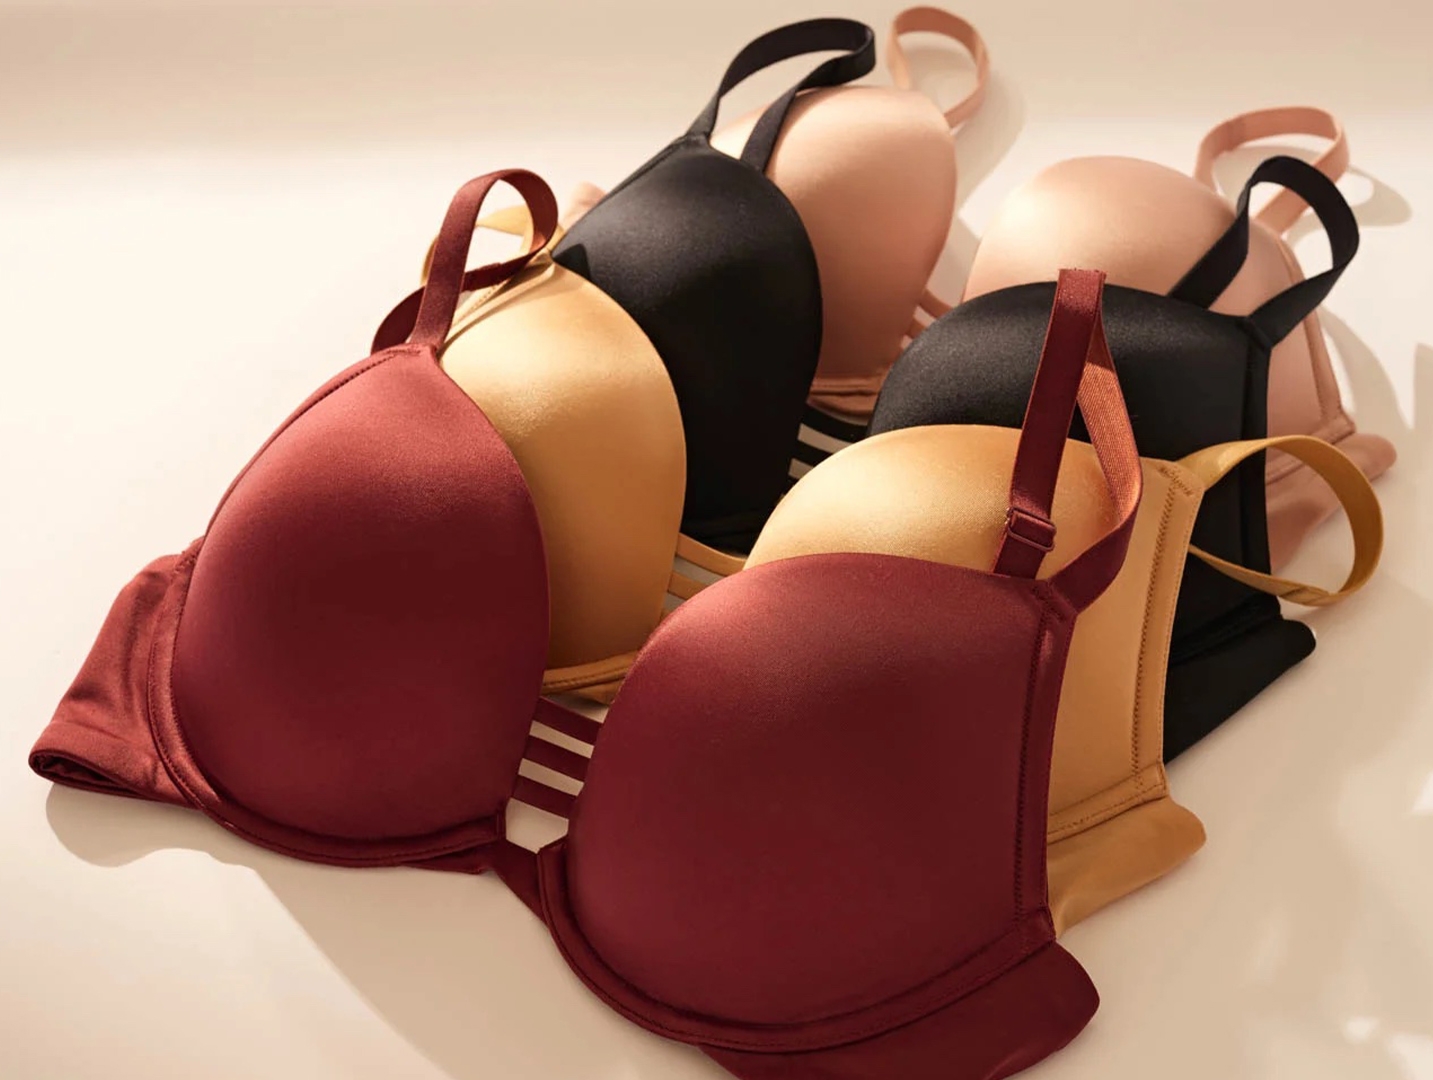 Soma<sup class=st-superscript>®</sup> laydown of nude, black, gold, and burgundy push-up bras for DD+ cup sizes.